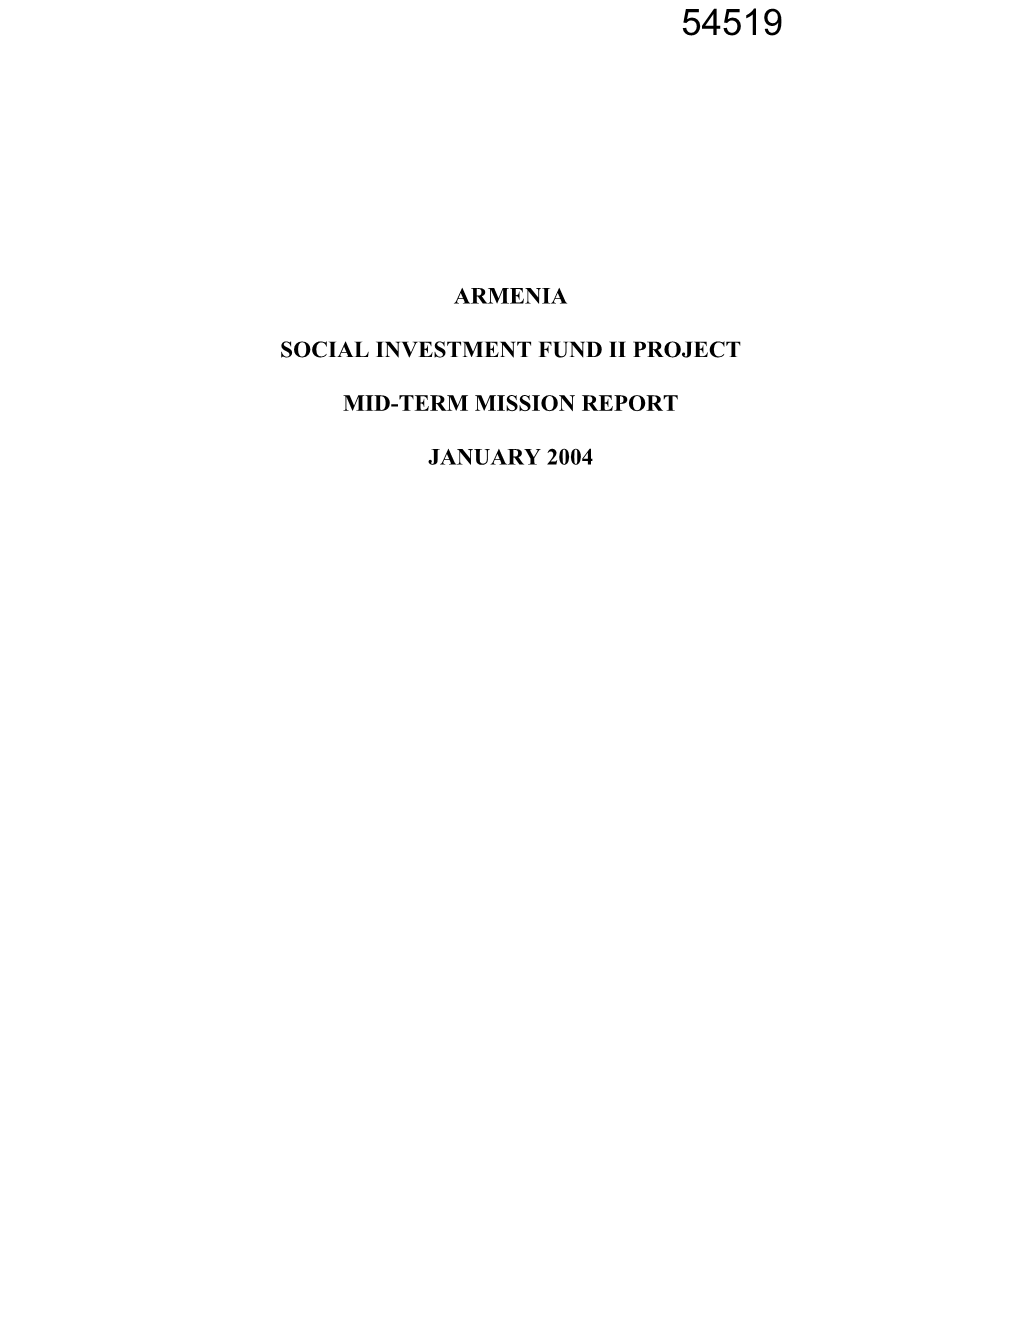 Social Investment Fund Ii Project